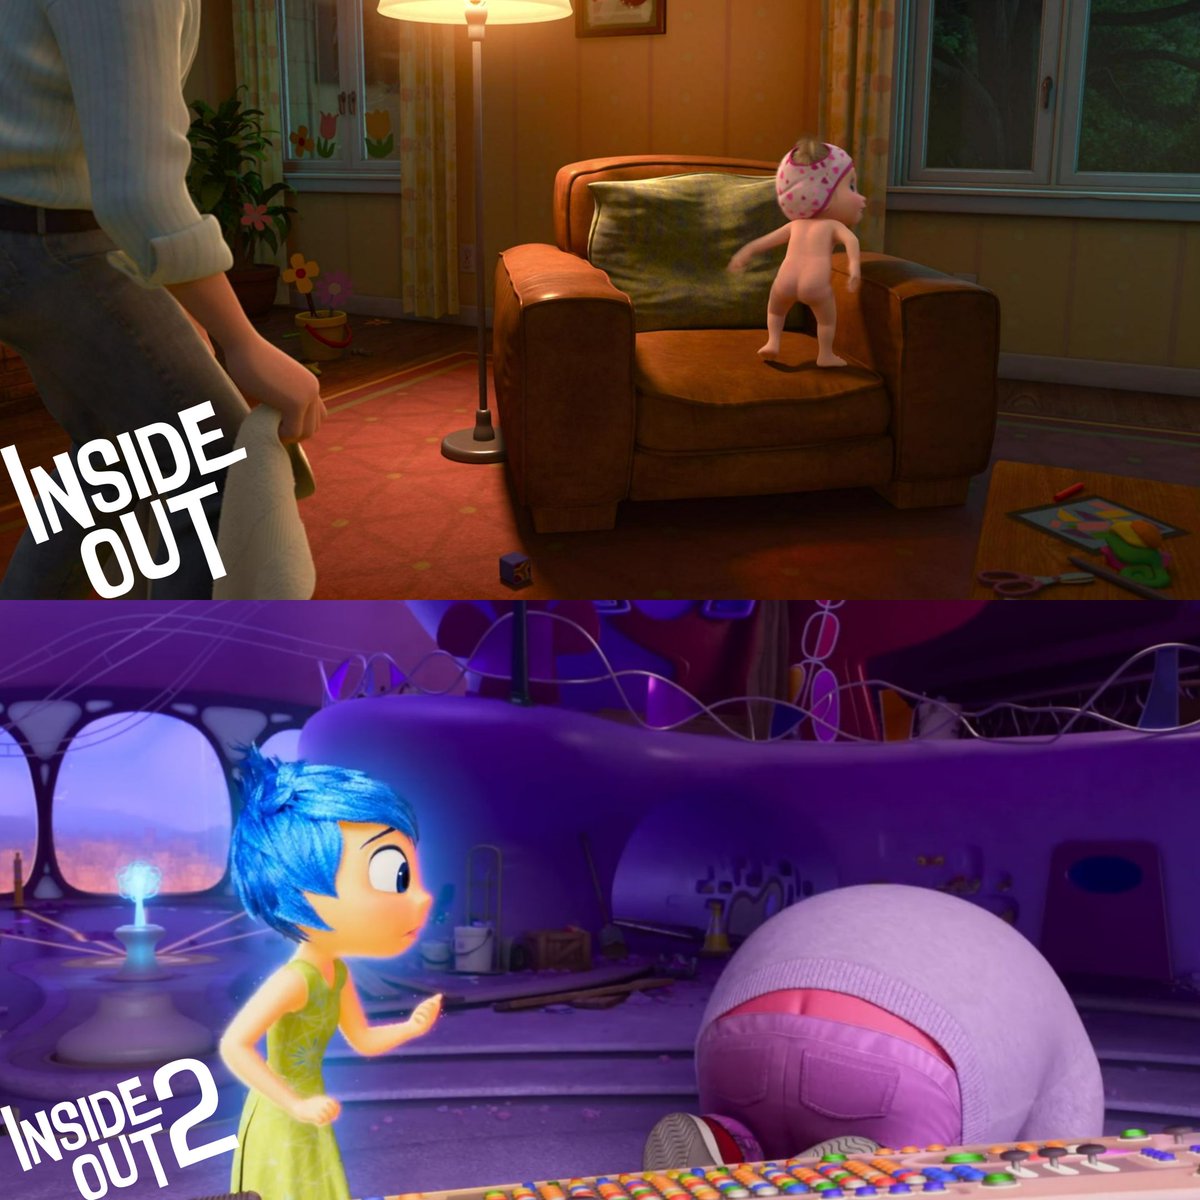 Evolution of butt from #InsideOut 2015 to #InsideOut2 2024